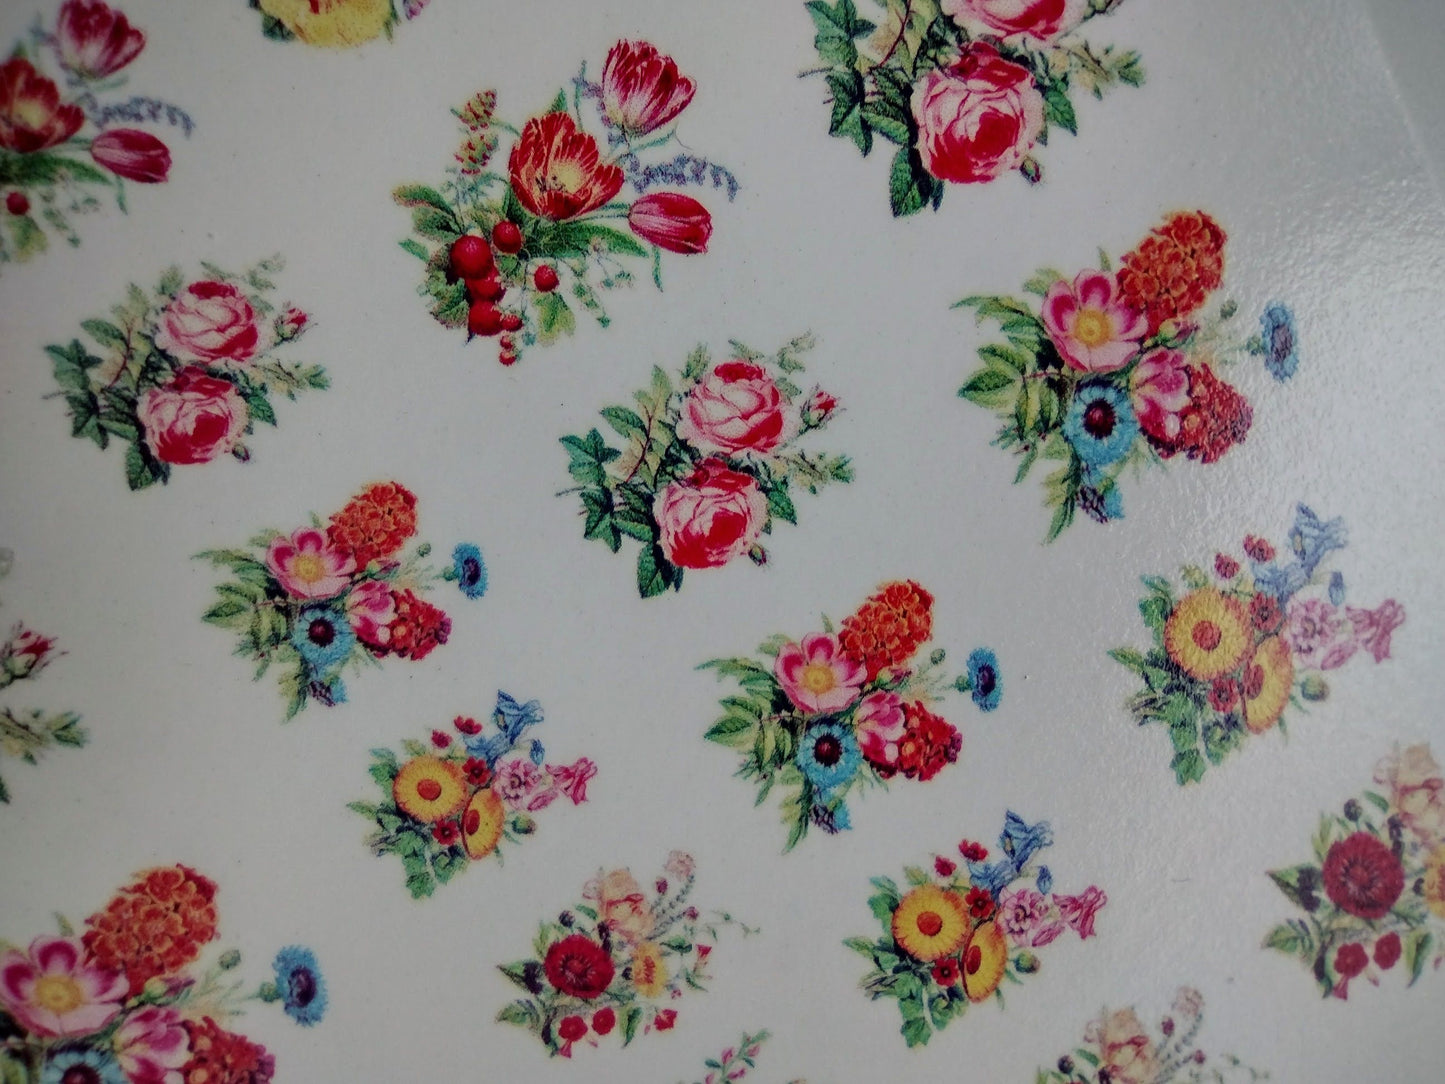 VICTORIAN FLOWERS Nail Decals